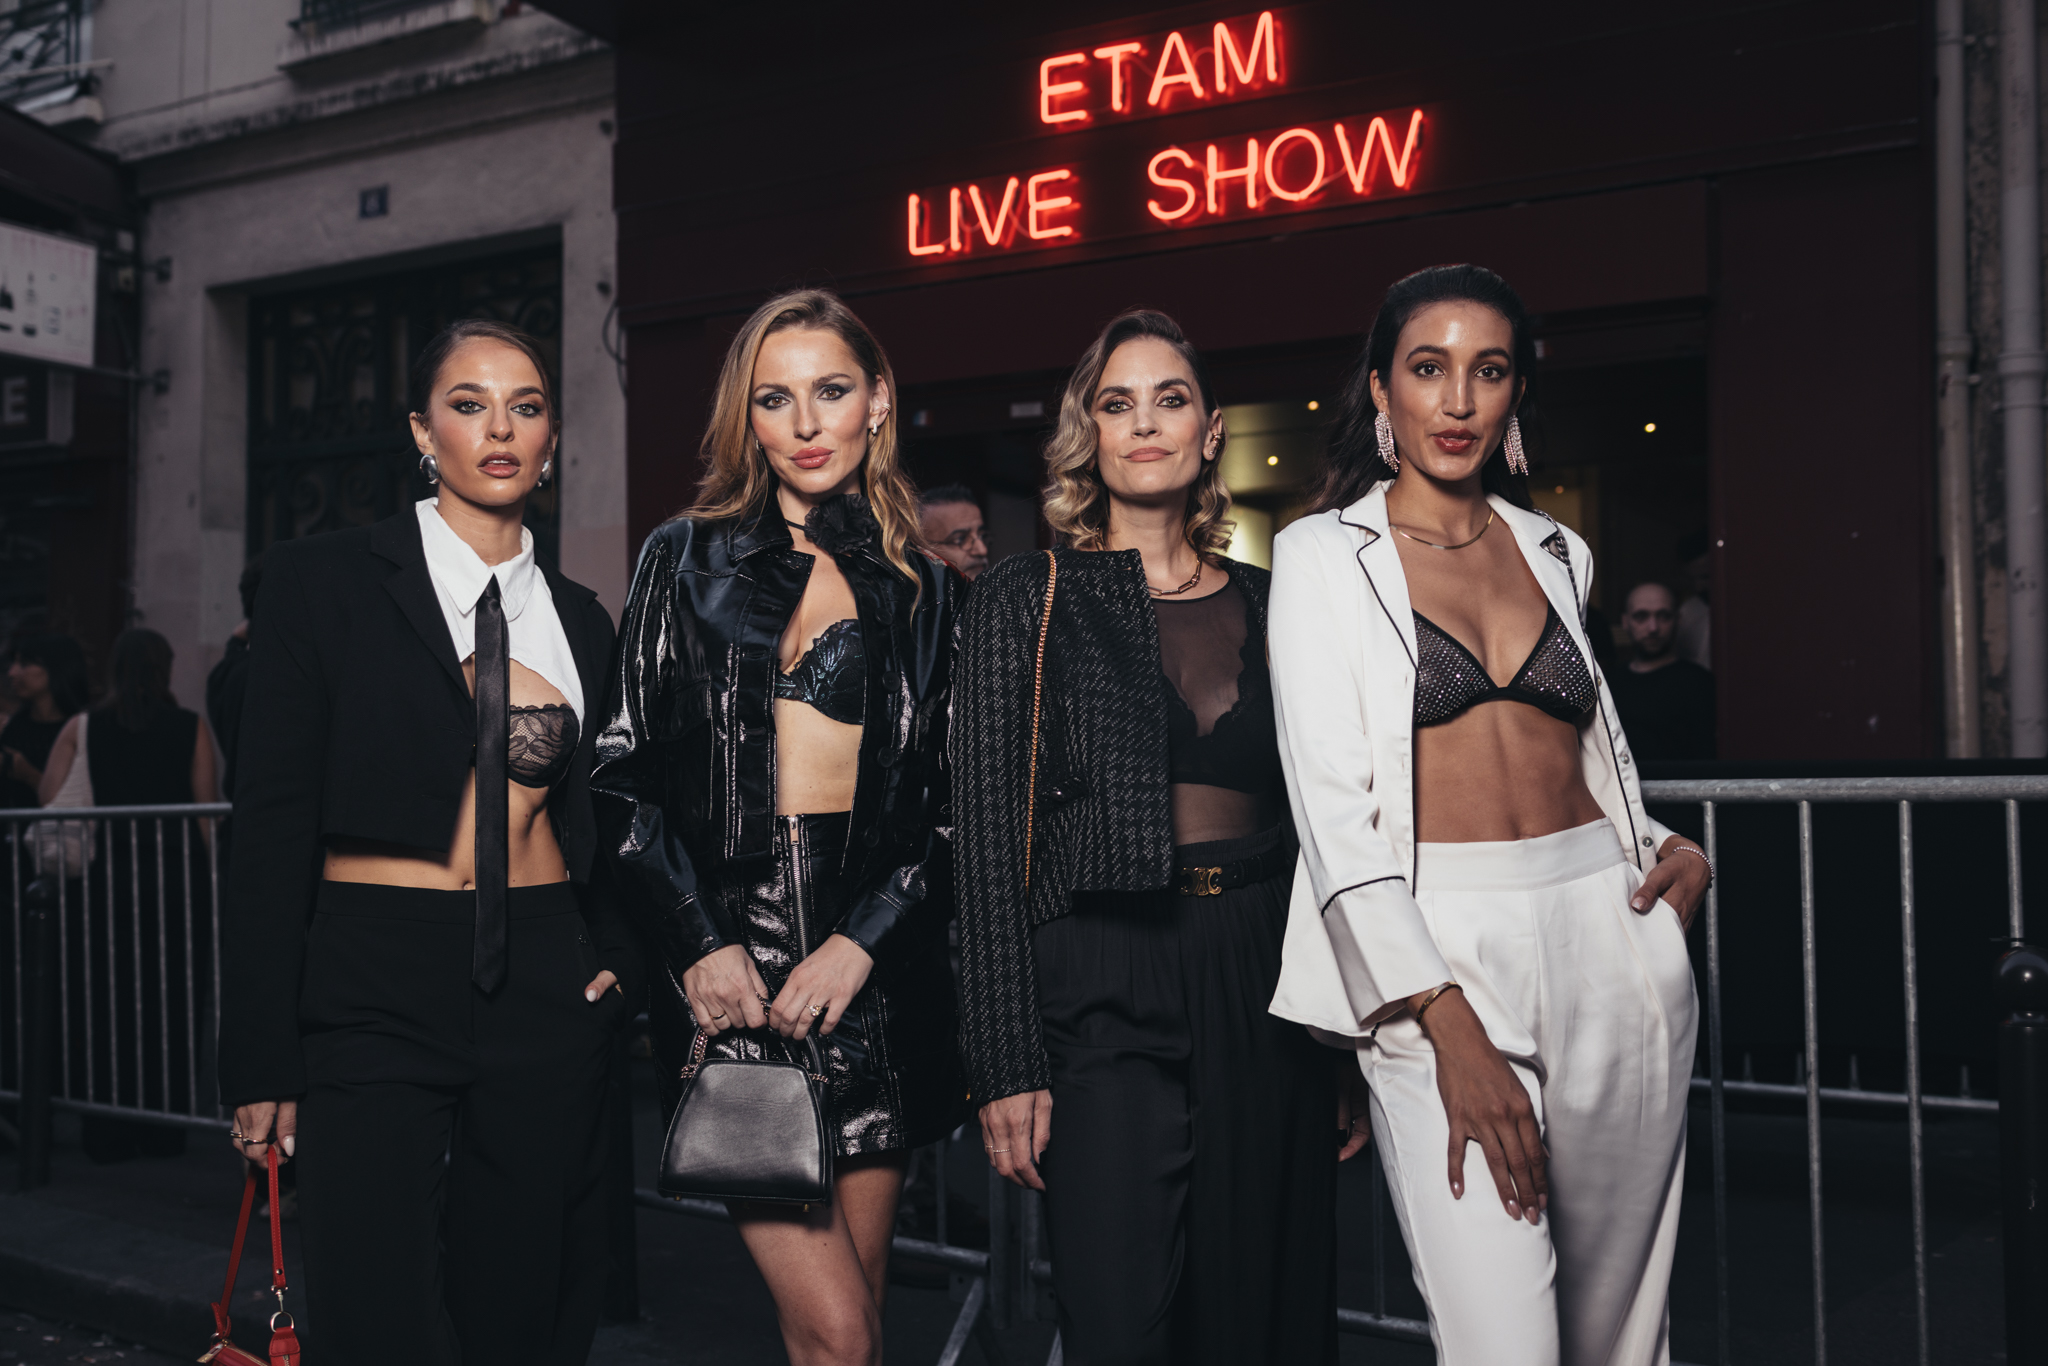 Etam's 80s-Inspired Extravaganza: A Dazzling Etam Live Show 2023 in Paris during PFW. Insights from the trip to Paris with the Swiss Ambassadors Team. 9